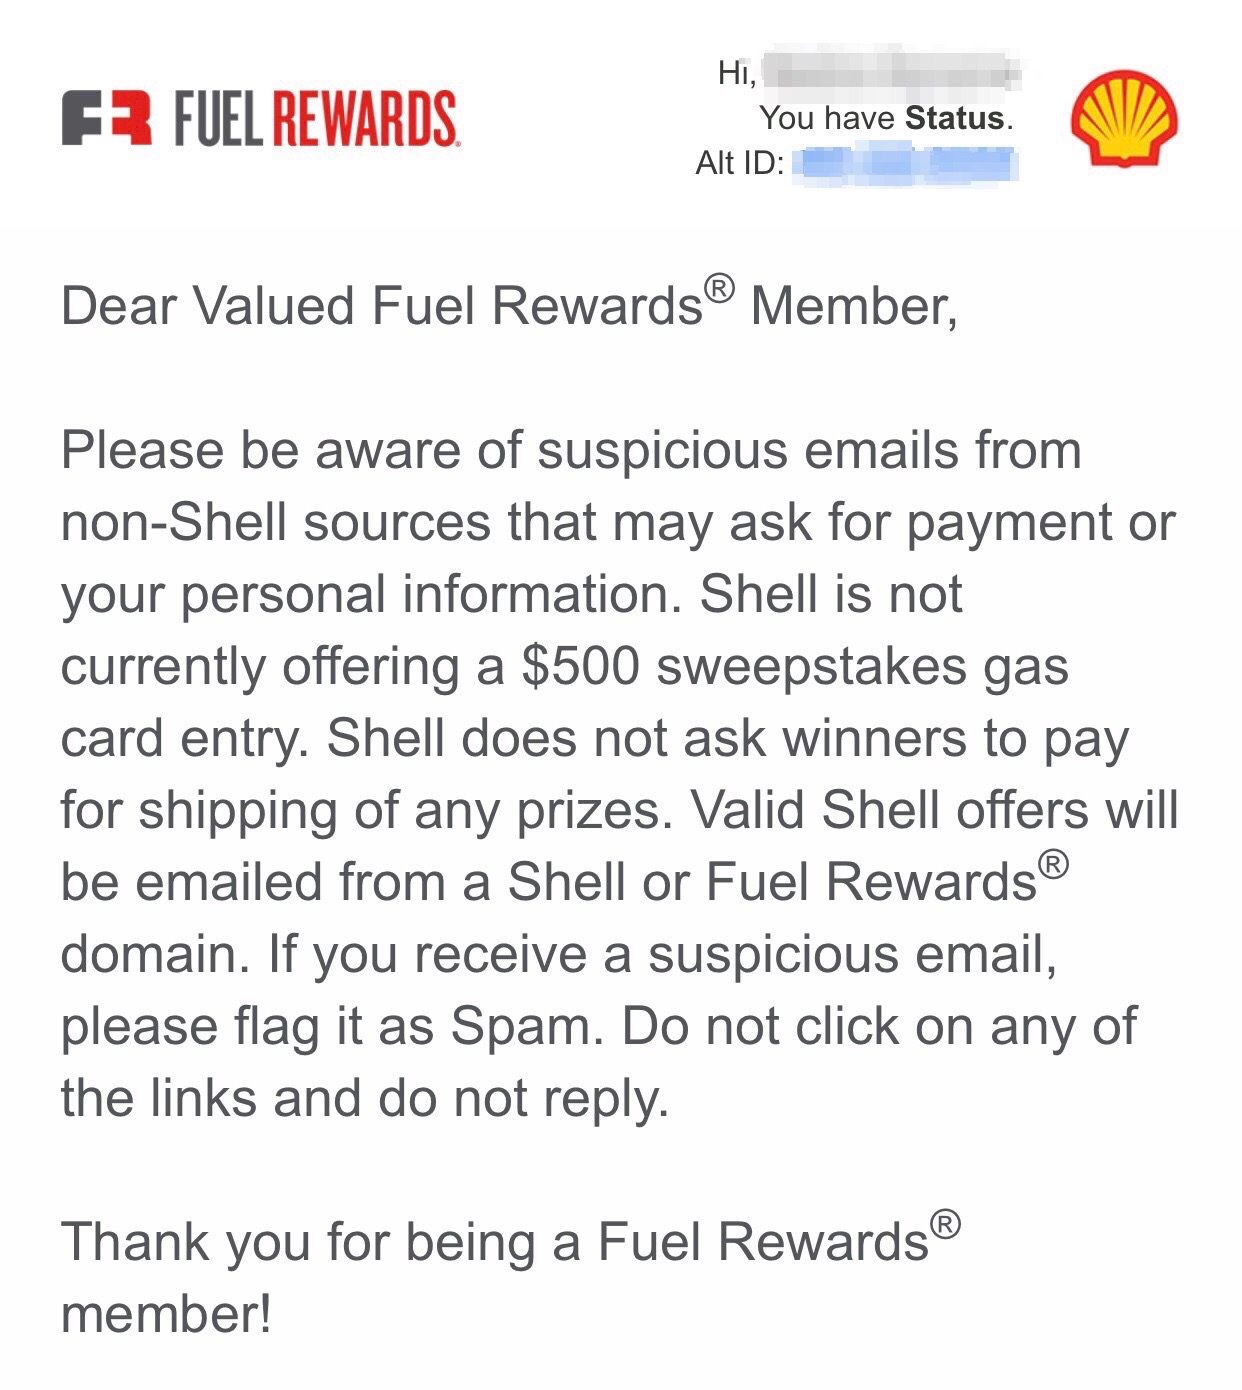 Shell Fuel Rewards email scam warning